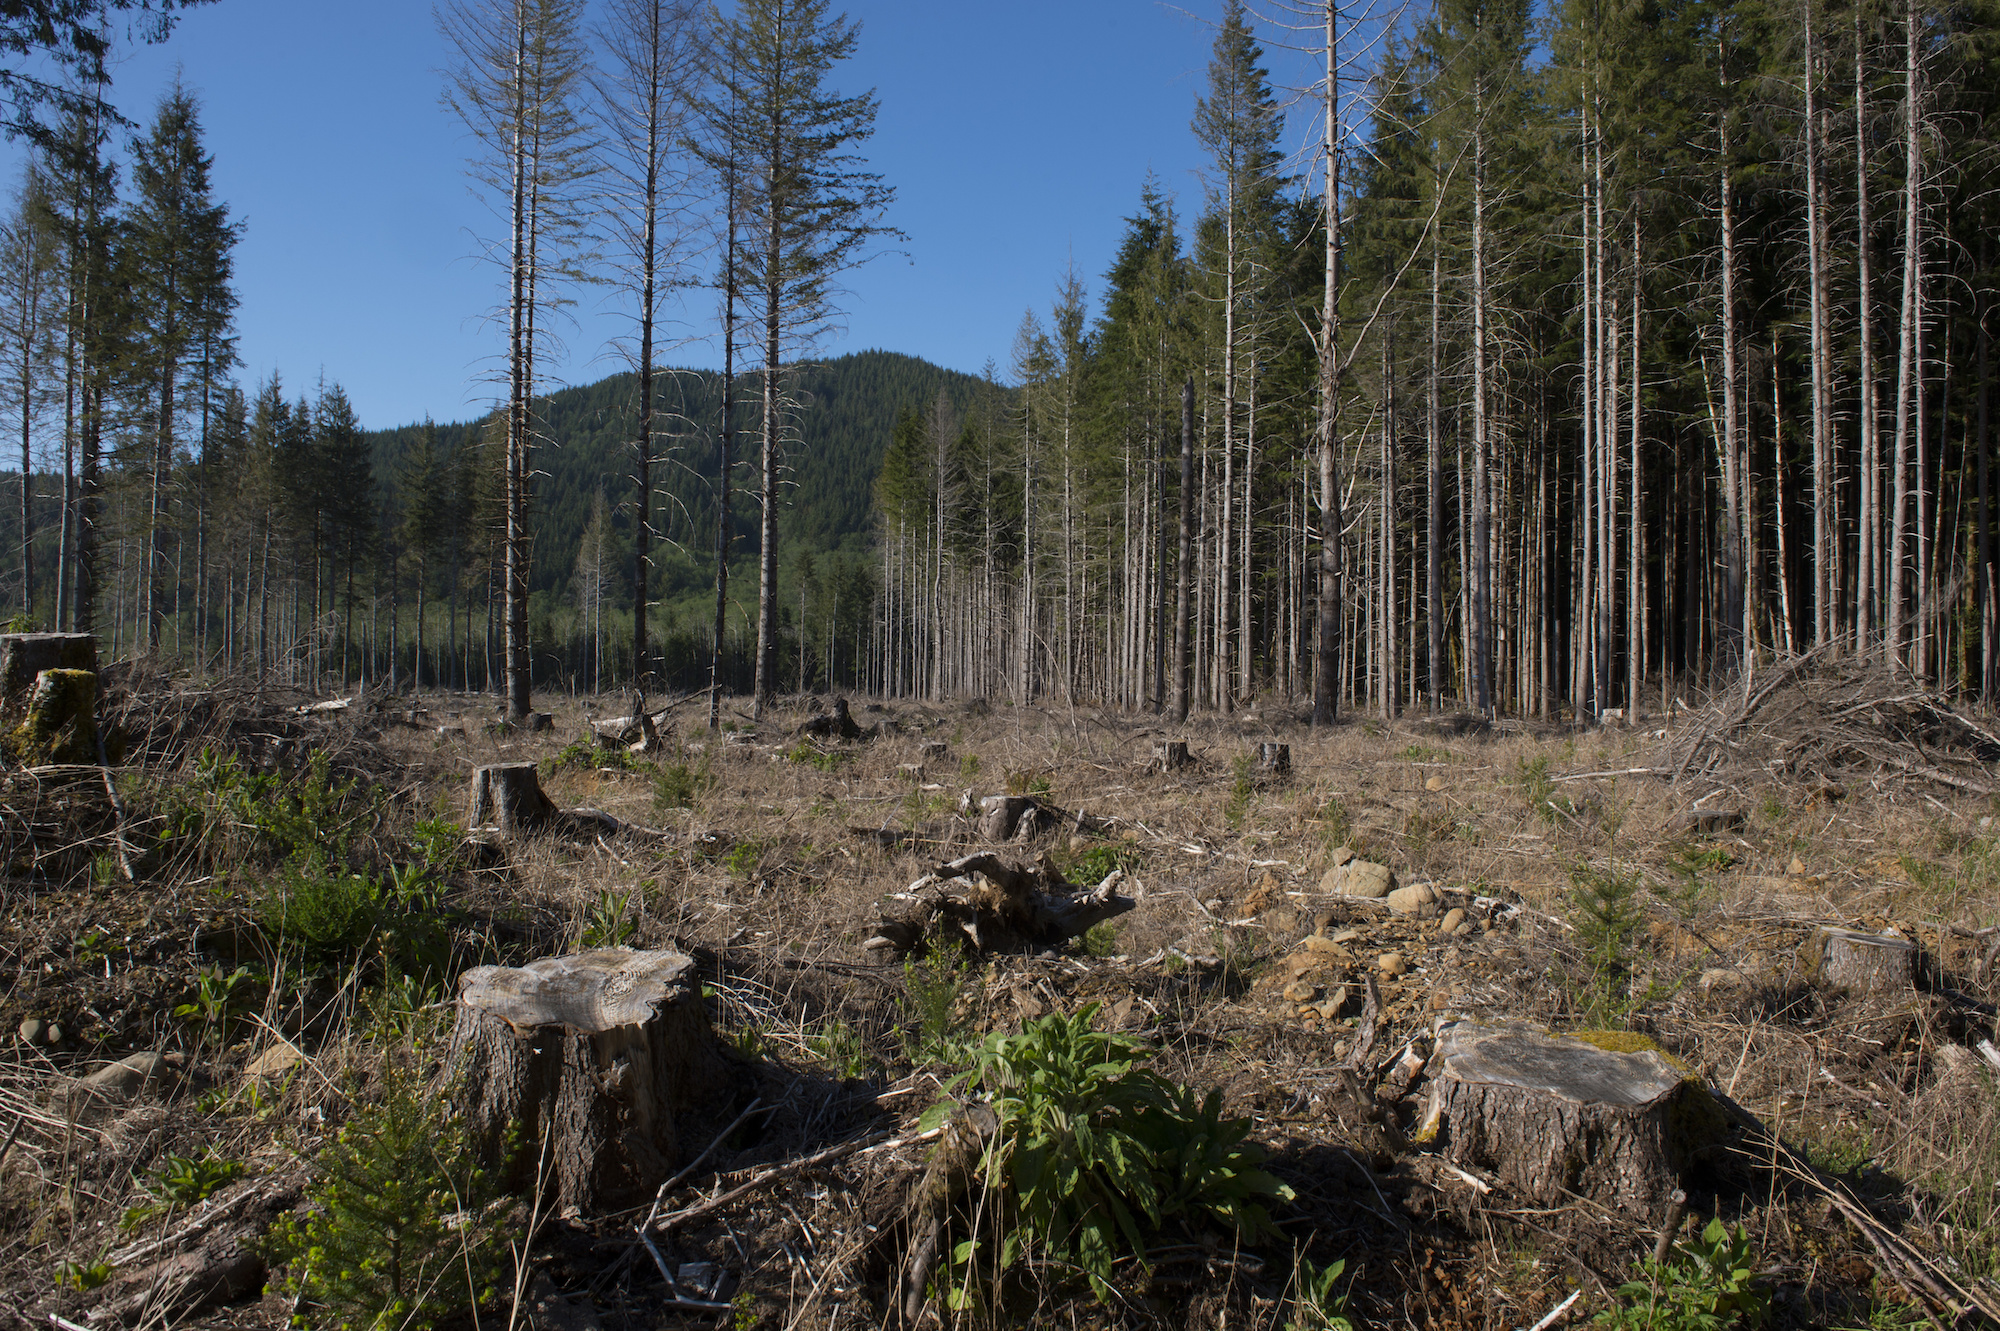 a large field of stumps where large old growth trees once stood. In the background, blue skies and tall green trees.